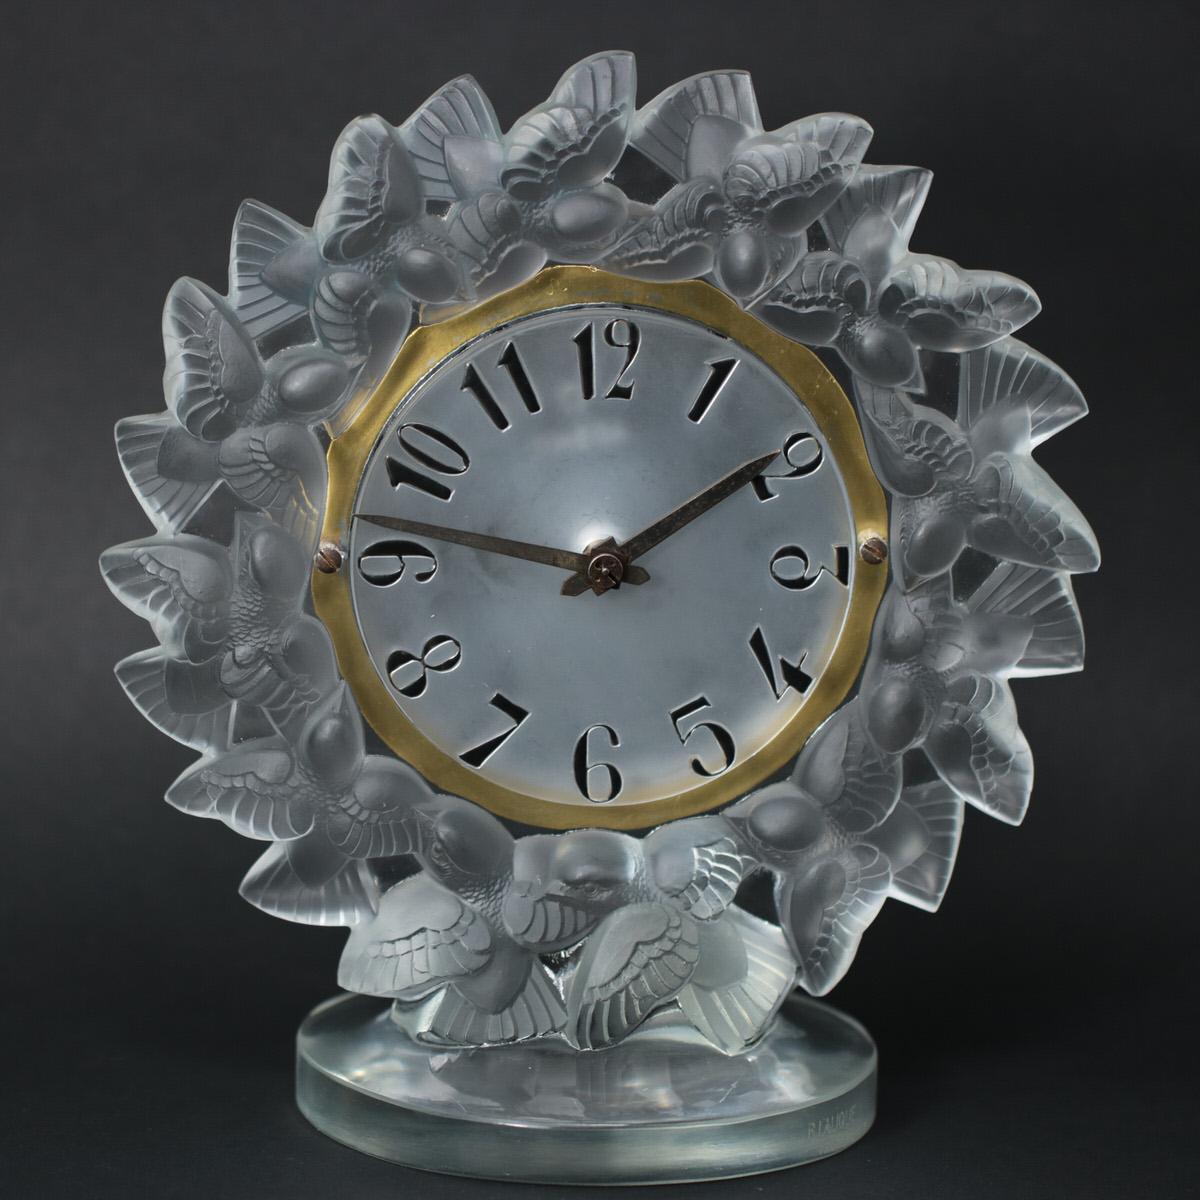 René Lalique frosted glass 'Roitelets' clock. This design features a ring of flying birds (wrens) around the clock face. The numbers on the clock face are moulded in glass and painted in black enamel. Stenciled makers mark, 'R. LALIQUE FRANCE' to